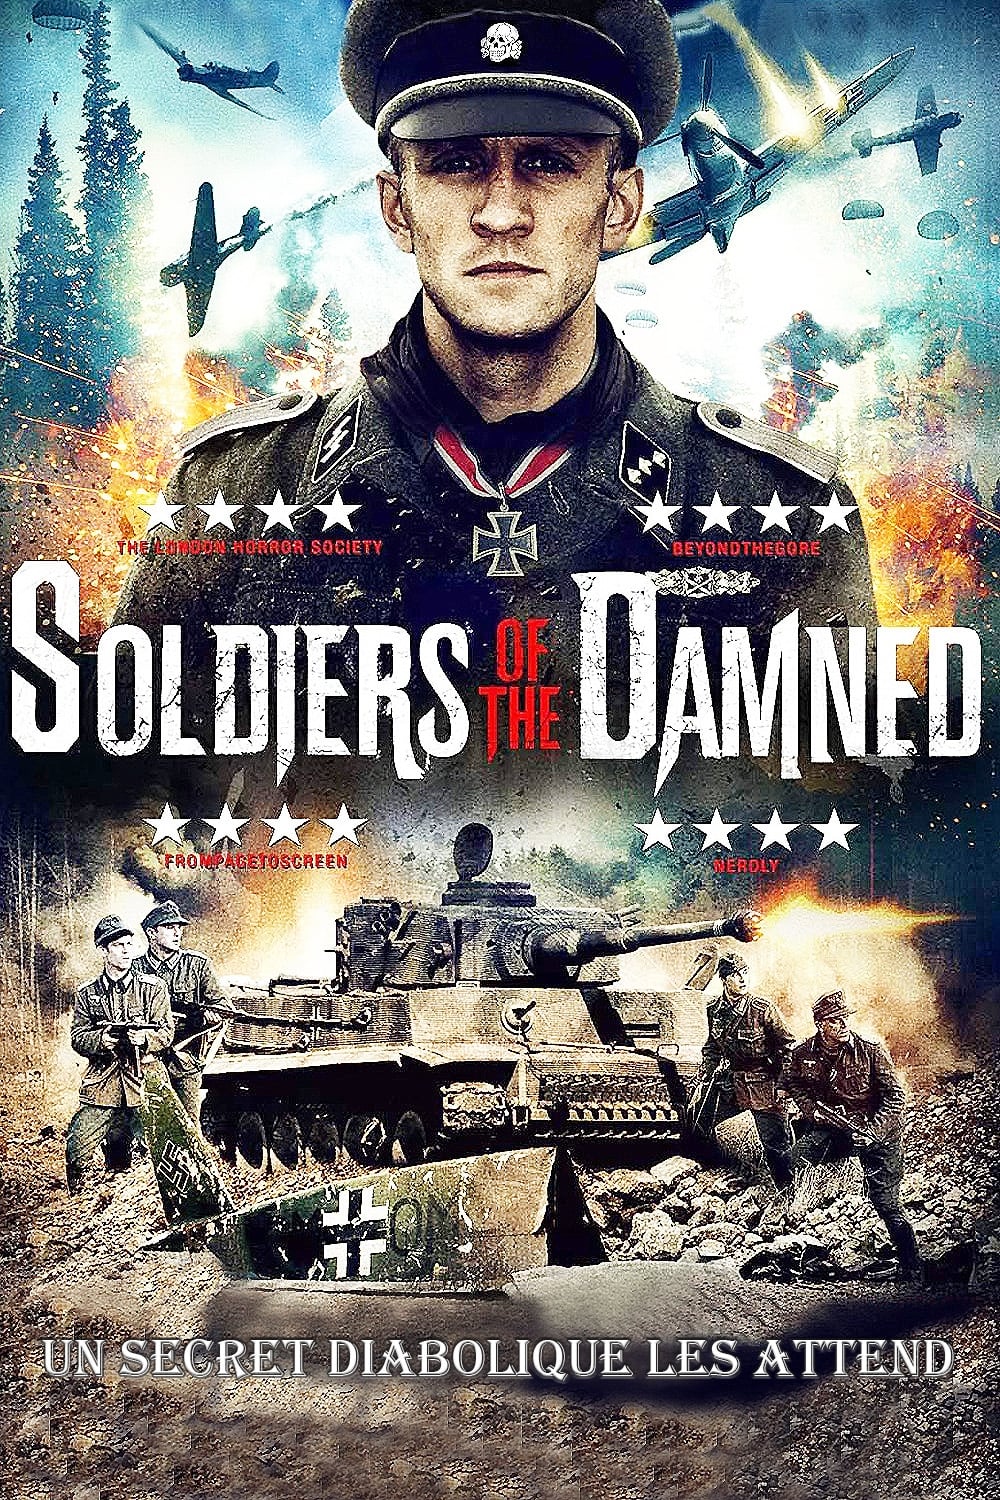 Soldiers of the Damned film